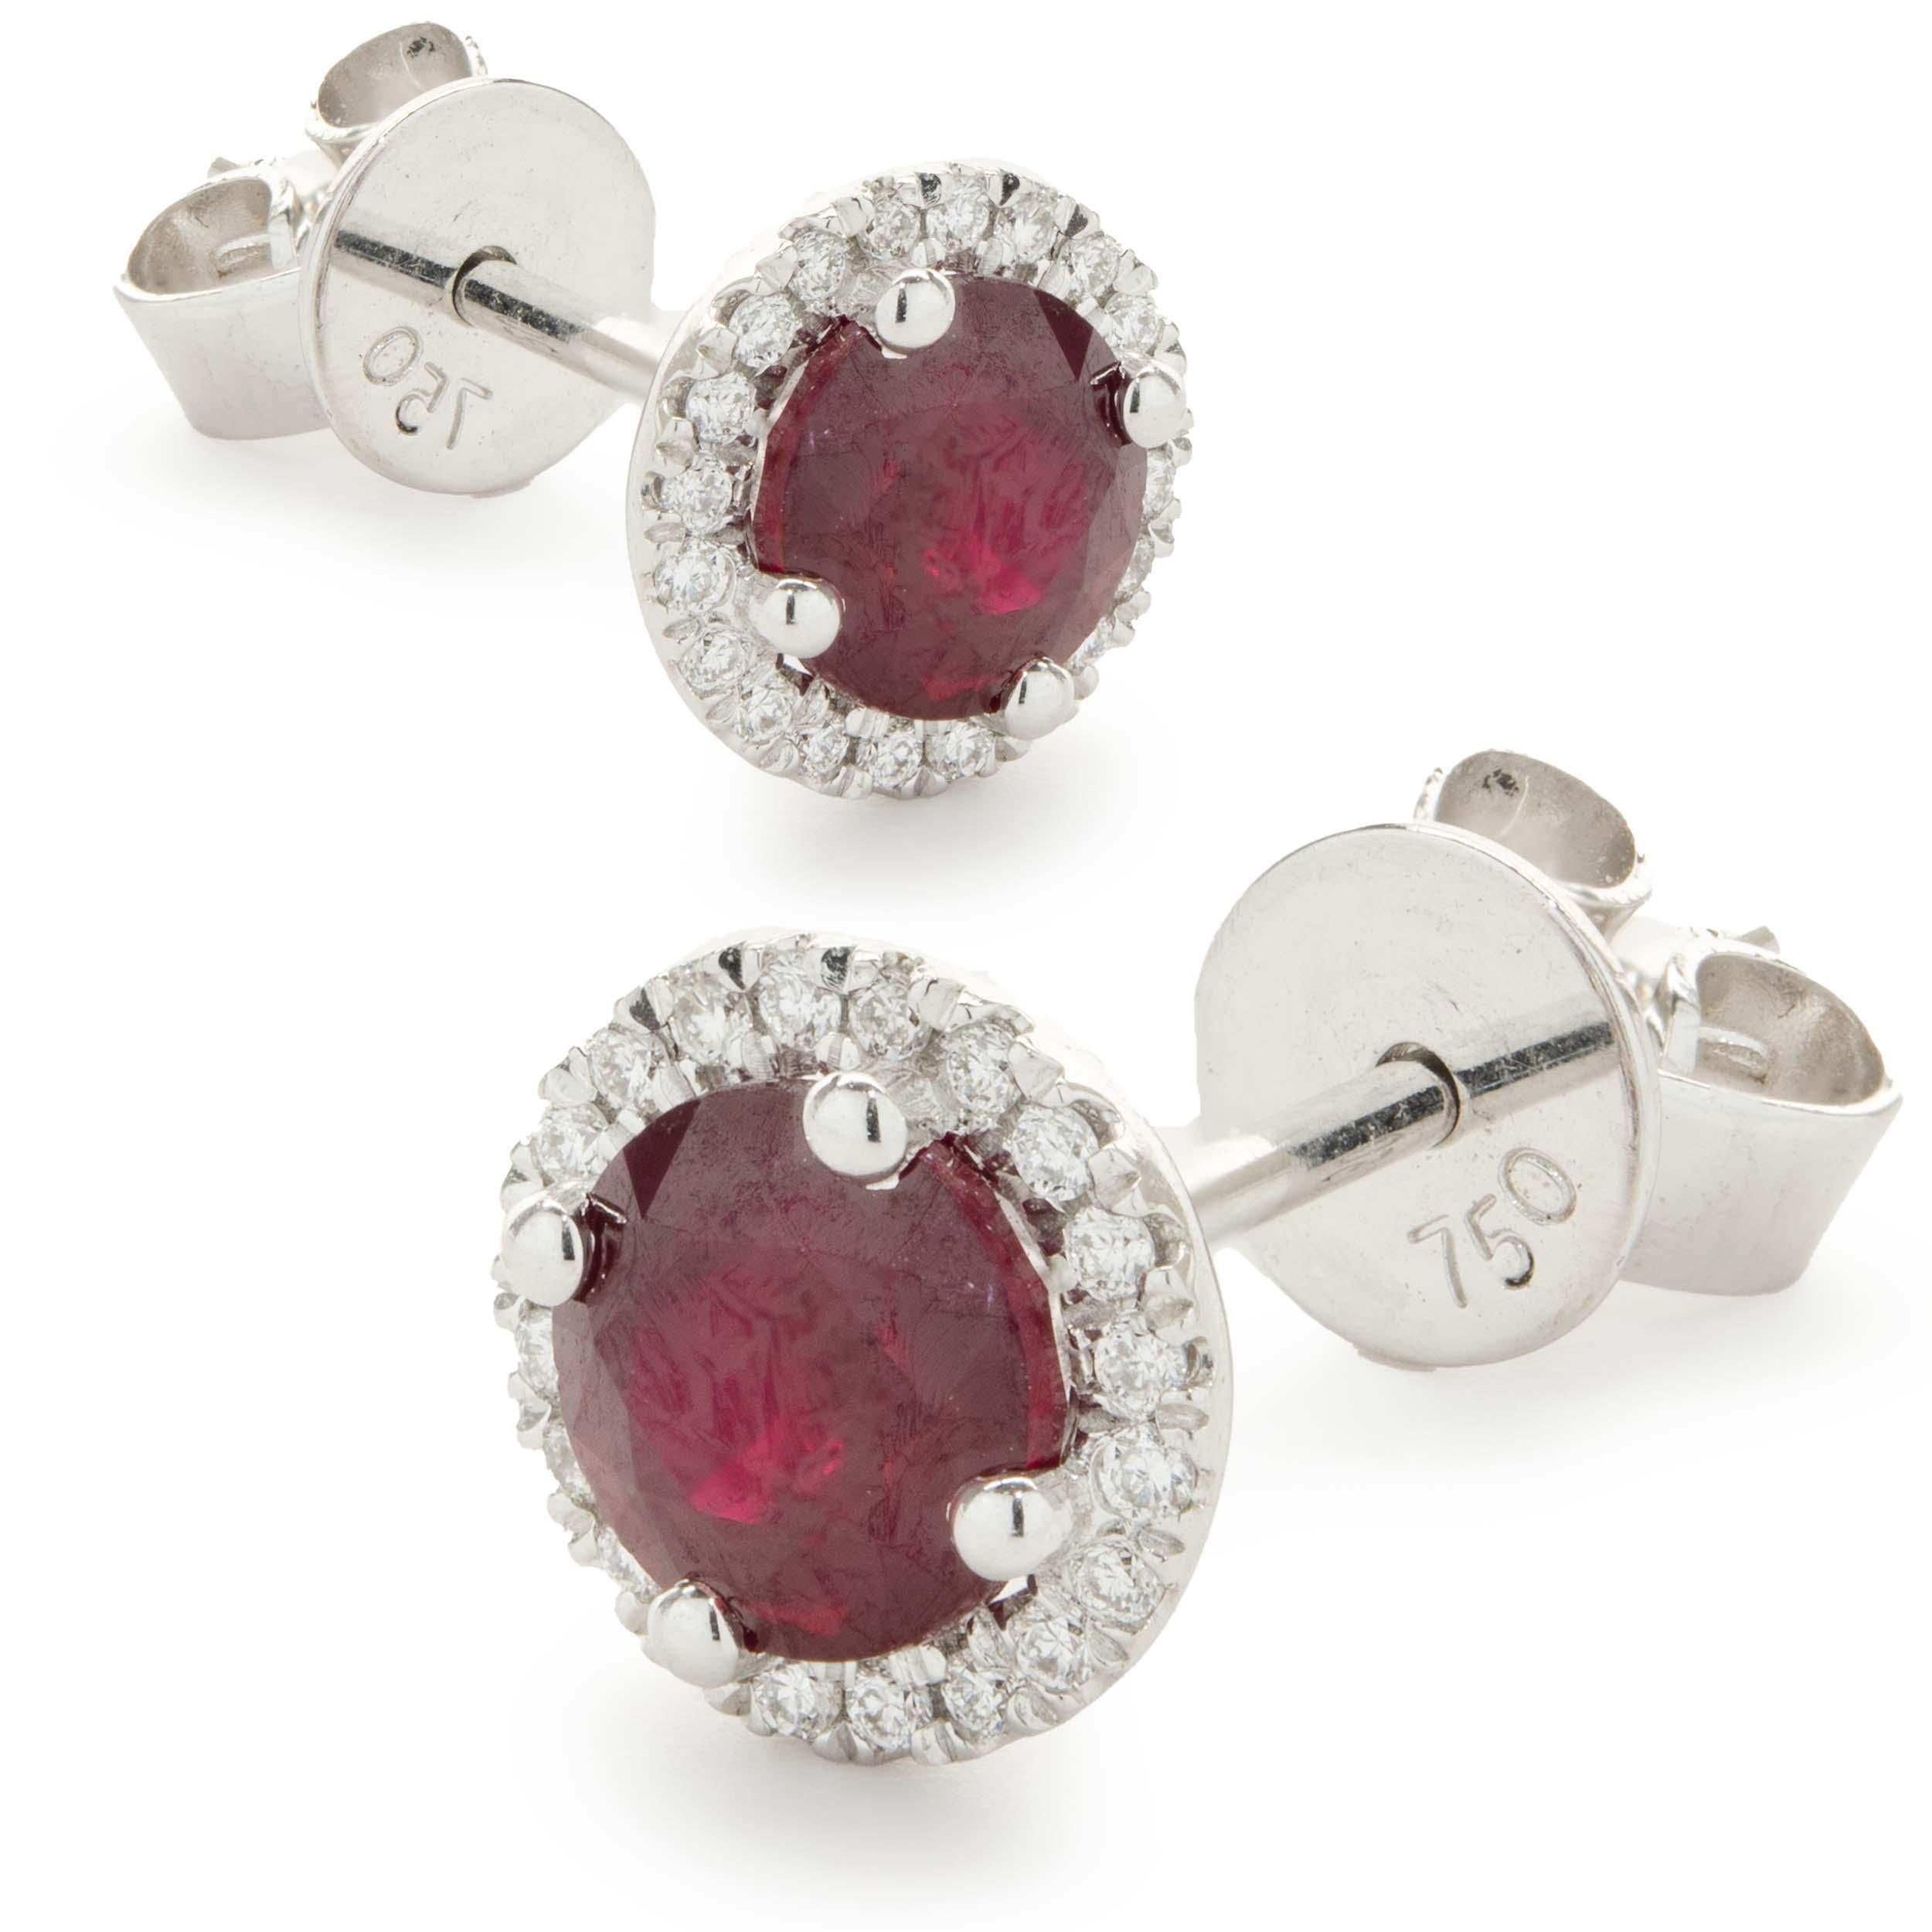 Designer: custom
Material: 18K white gold
Diamond: 40 round brilliant cut = 0.09cttw
Color: G
Clarity: SI1
Ruby: 2 round cut = 1.27ct
Dimensions: earrings measure 7.19mm in length 
Fastenings: friction backs
Weight: 1.90 grams
